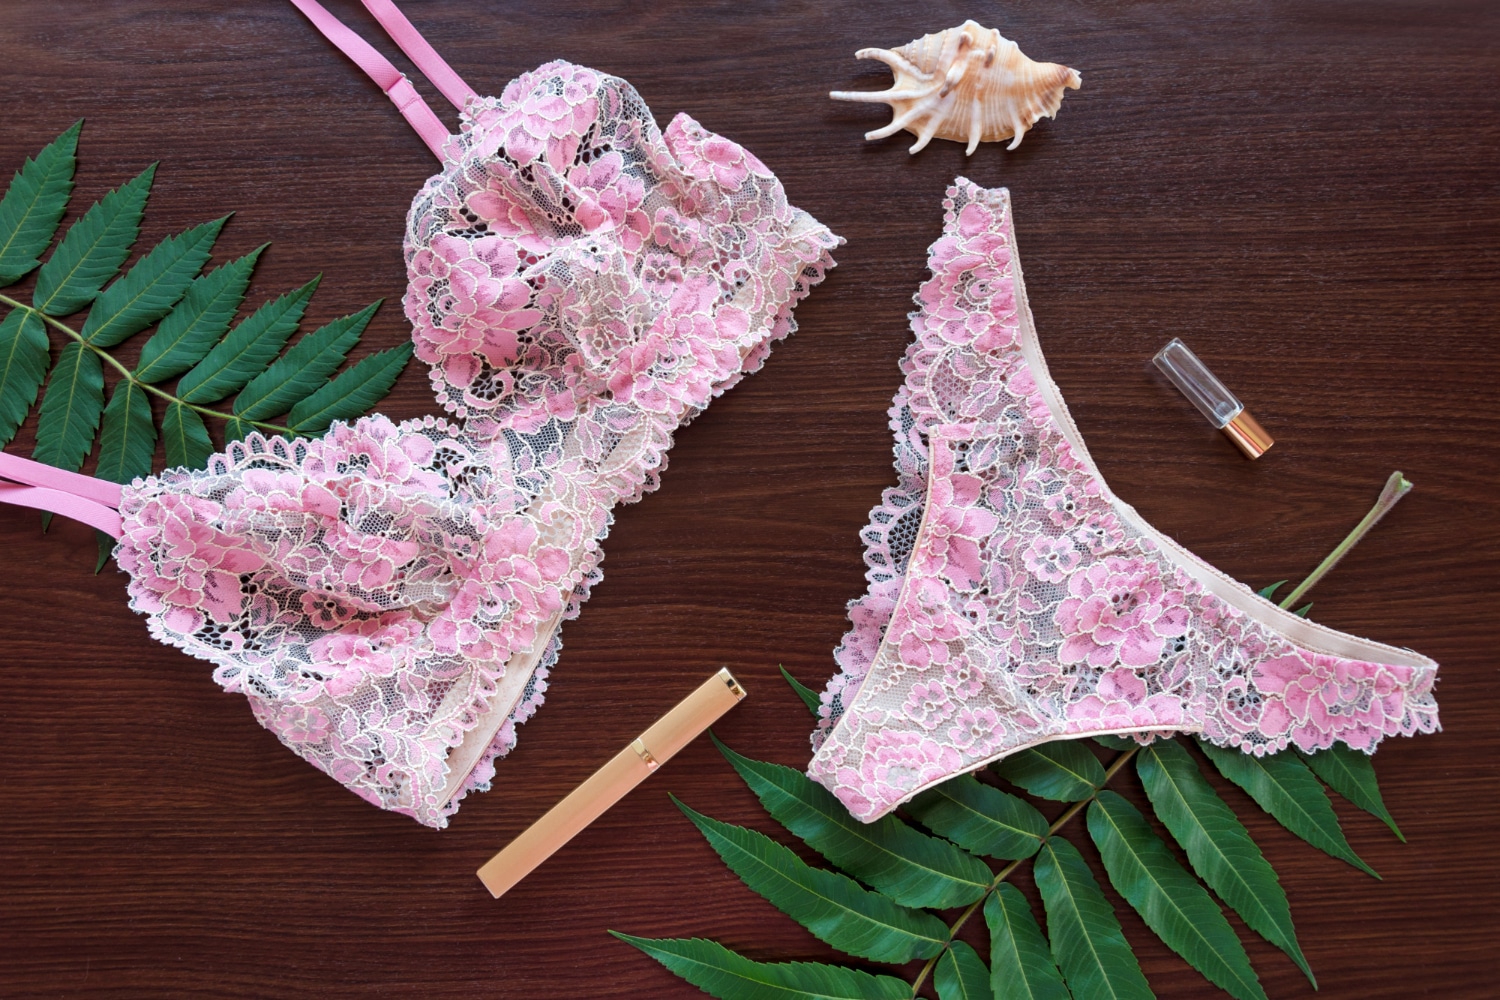 You are currently viewing Knickey: Revolutionizing Underwear with Organic Cotton